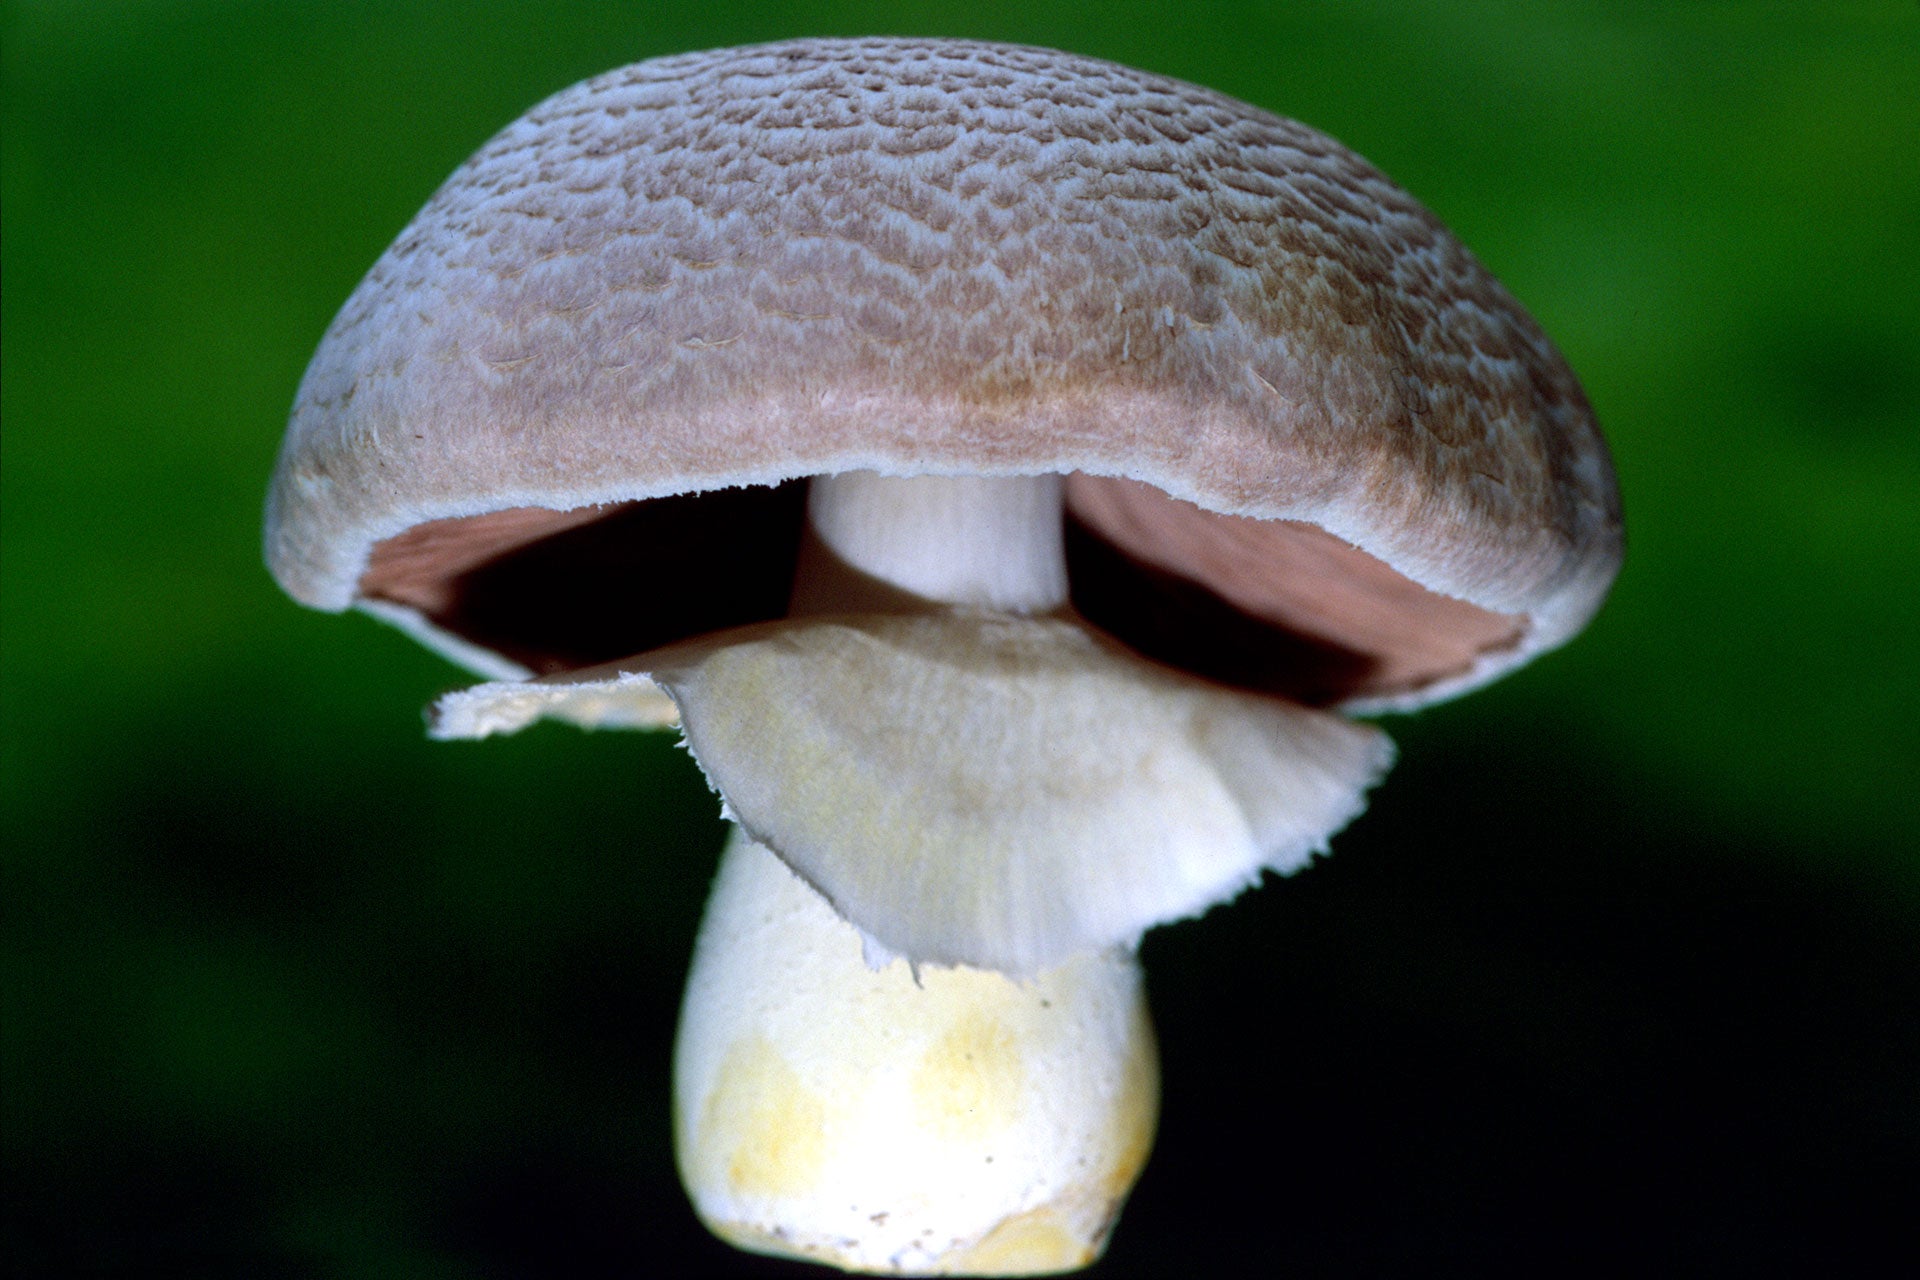 What Happened to the Name "Agaricus blazei?"